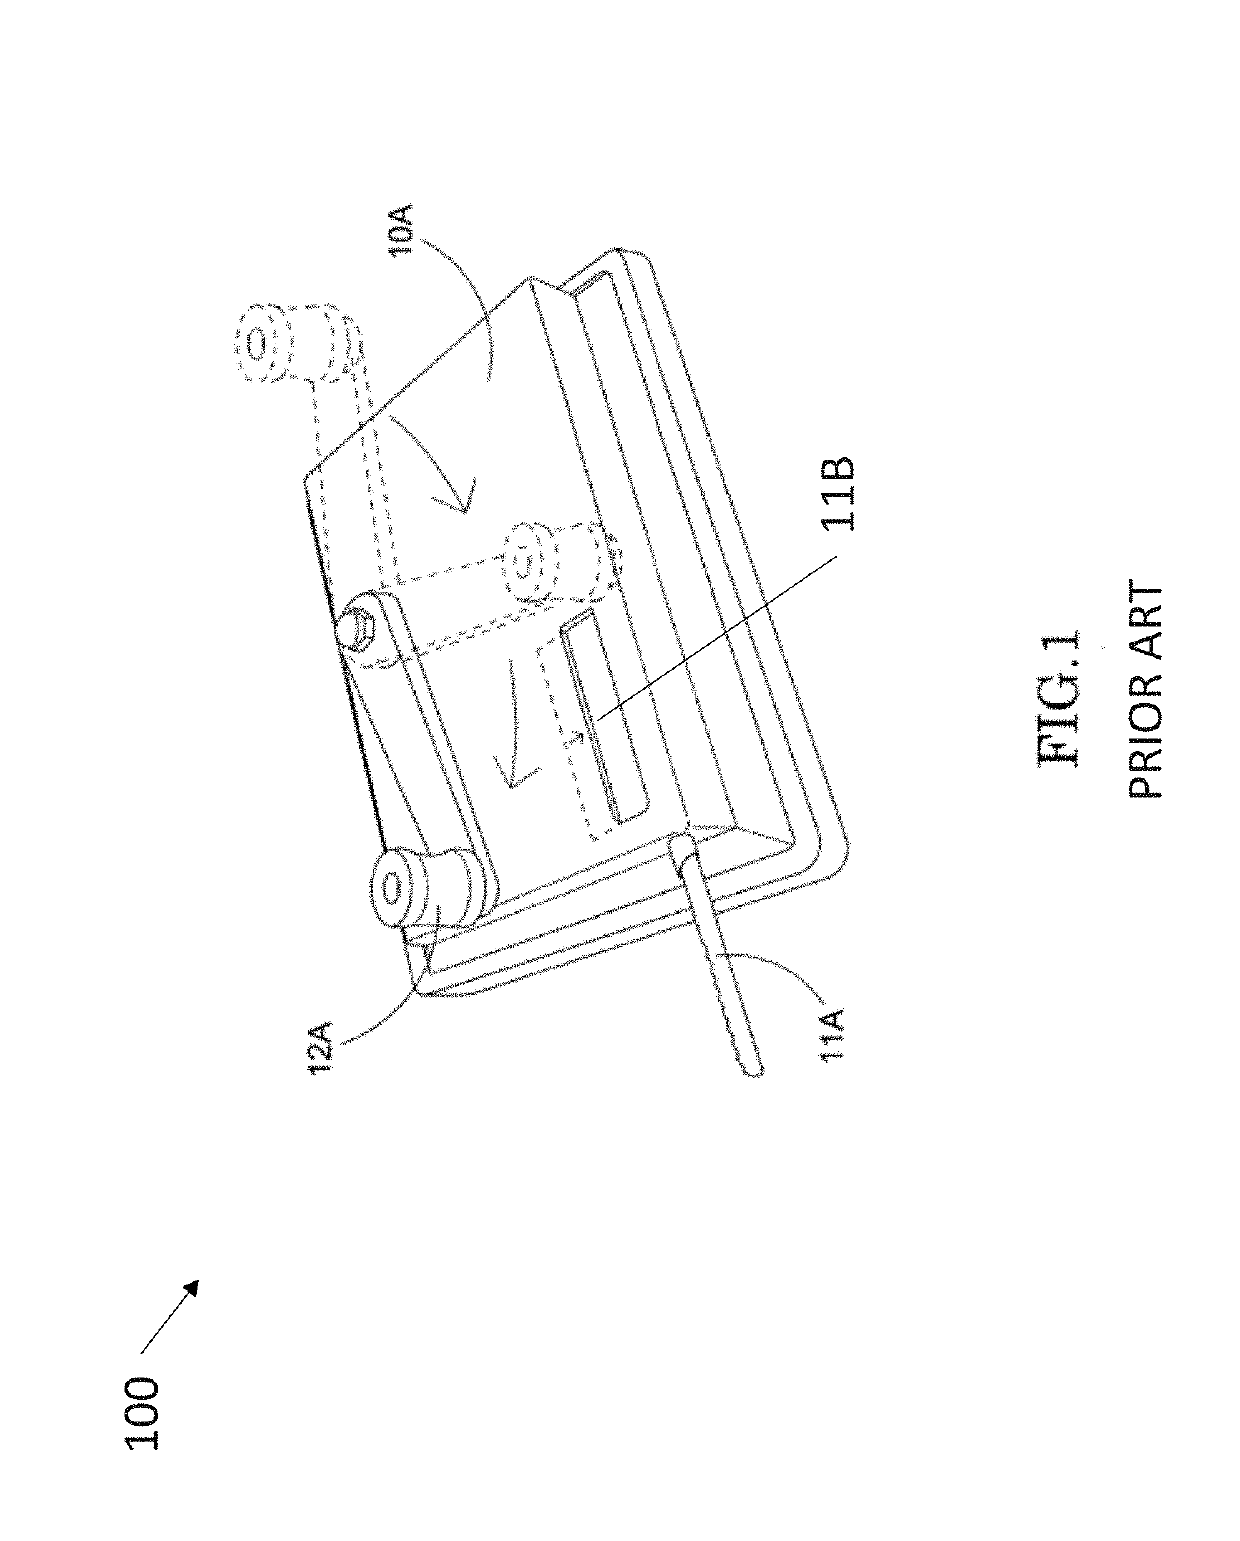 Systems, methods, and devices for delivering tobacco into tobacco casing tubes